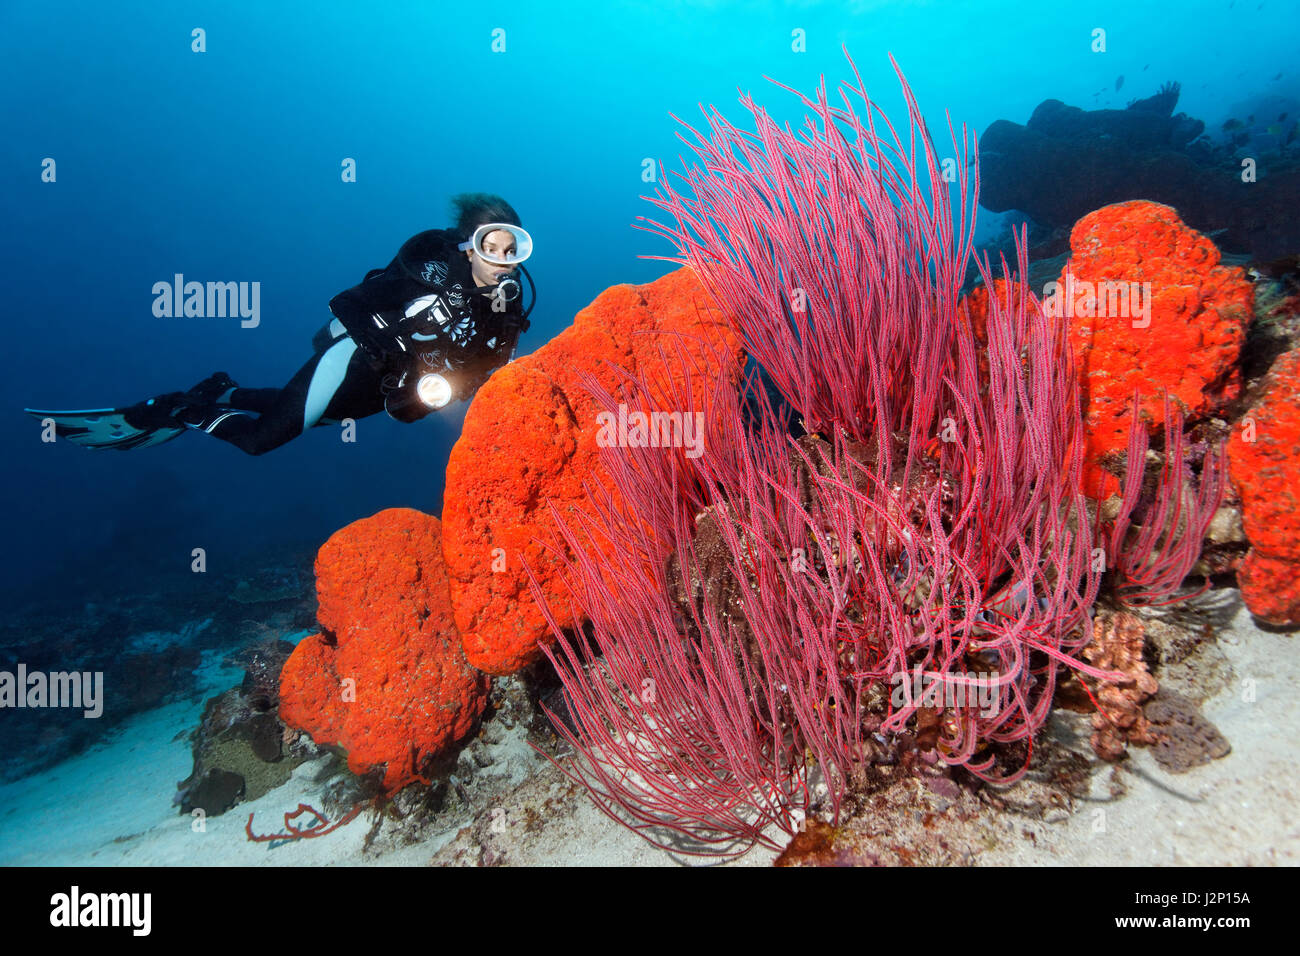 Diver is looking at the Orange elephant ear sponge (Agelas clathrodes) and the Red whip coral (Ellisella ceratophyta) Stock Photo